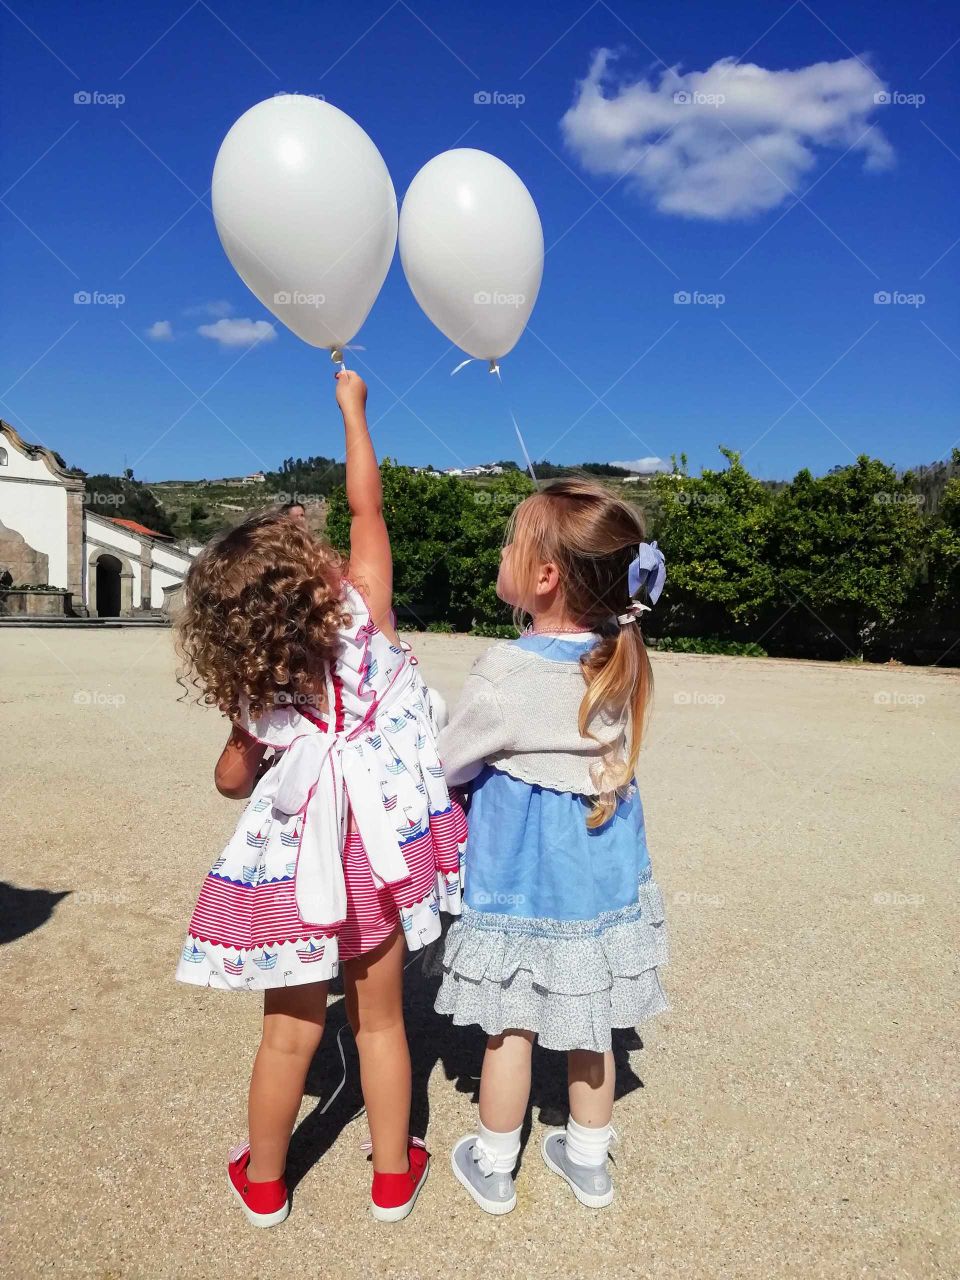 Two little girls holding their balloons in a beautiful landscape scenery.. Summertime is here